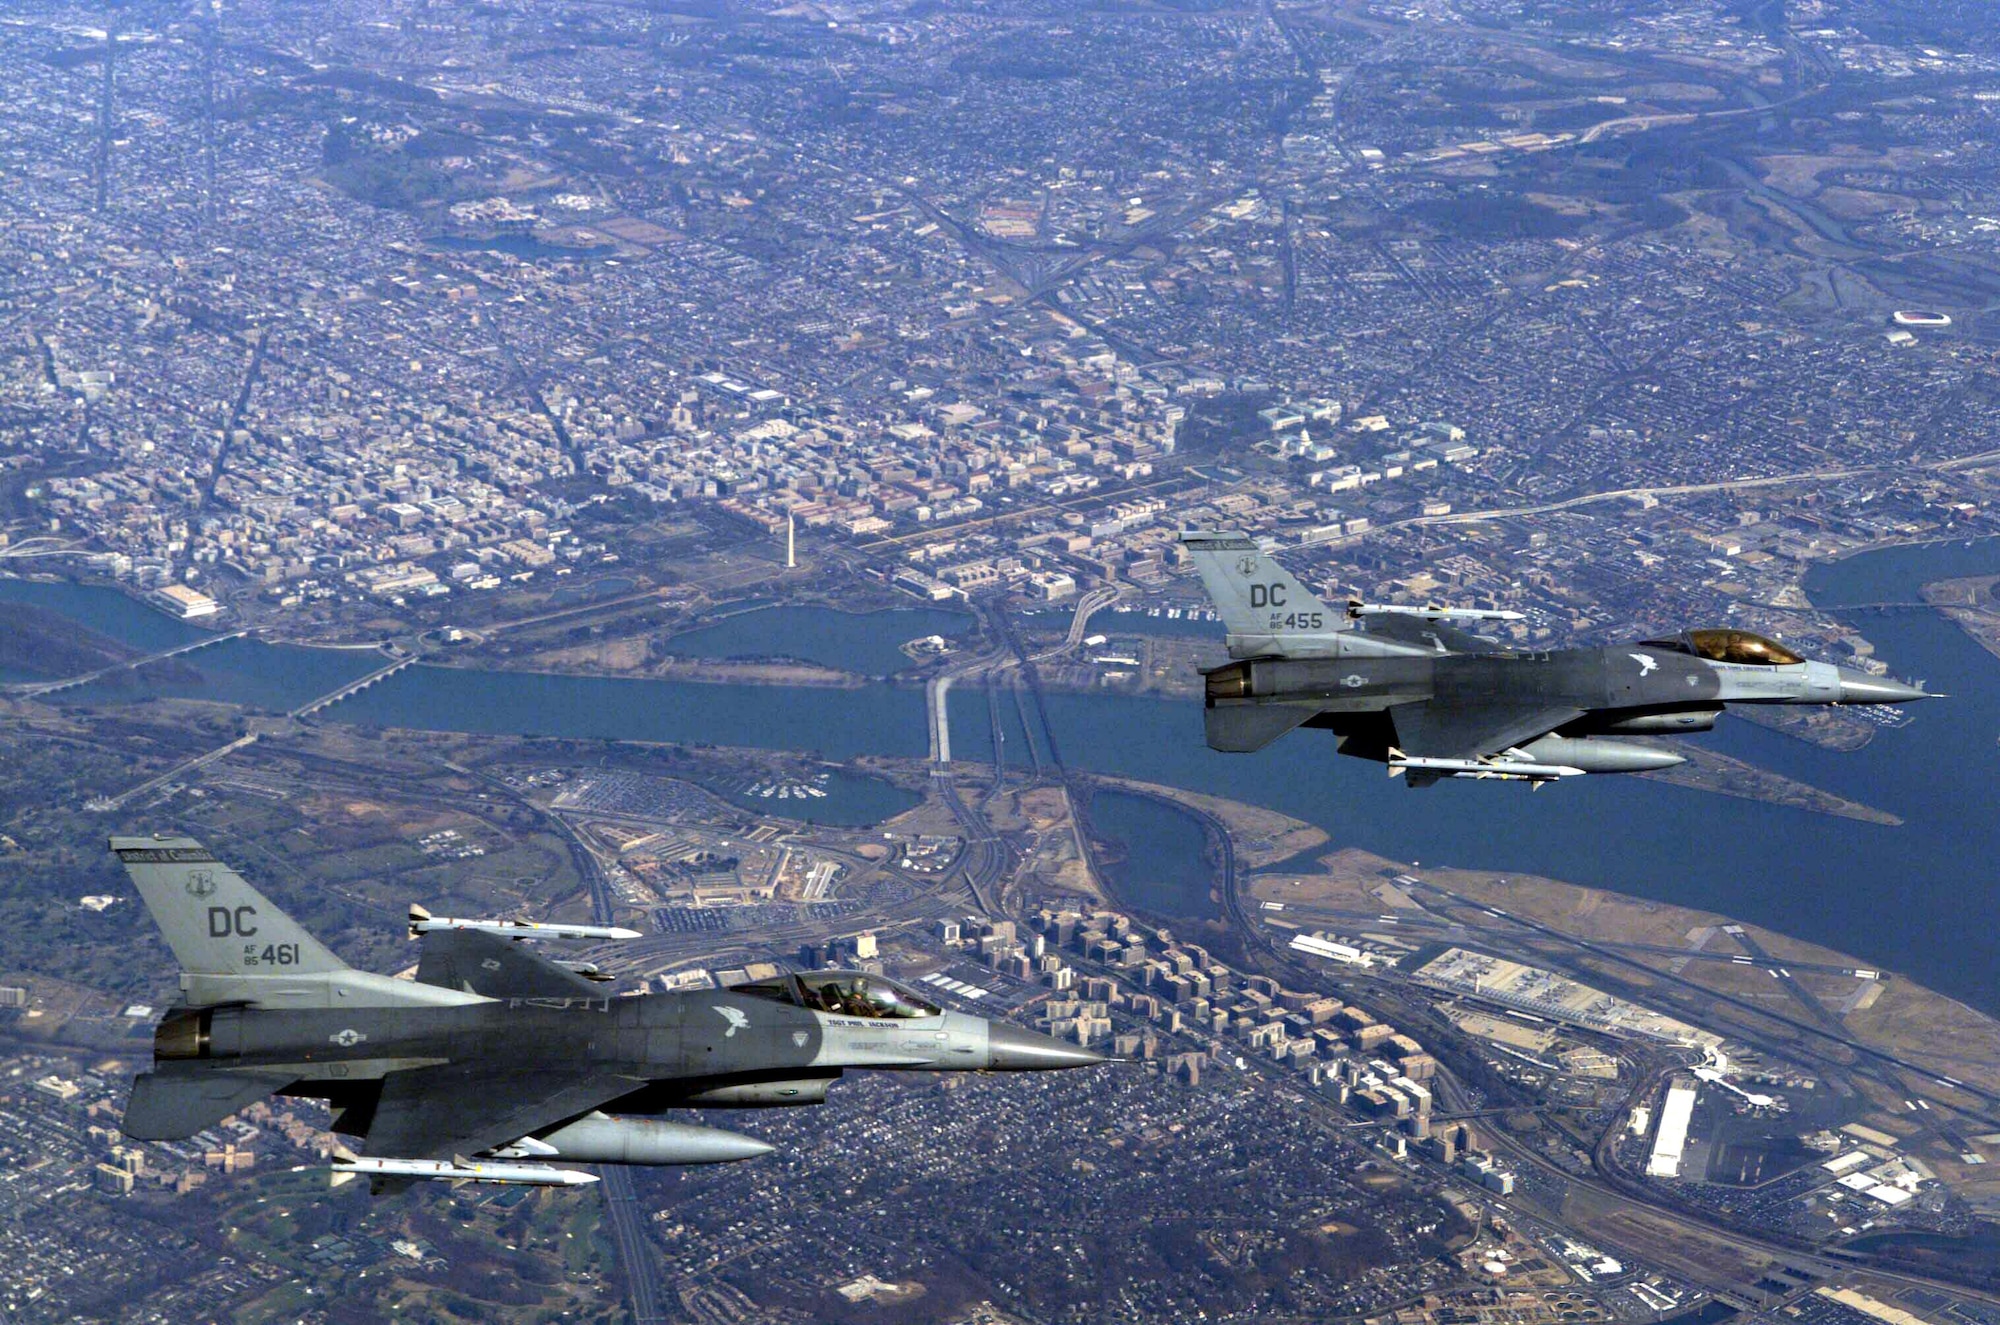 Two US Air Force (USAF) F-16C Fighting Falcon aircraft from the 121st Fighter Squadron, 113th Wing, District of Columbia (DC) Air National Guard (ANG), in flight over the nation's Capital, during a Combat Air Patrol mission in support of Operation NOBLE EAGLE.  Air Force fighters and civilian aircraft will participate in FALCON VIRGO 07-09, a monthly National Capitol Region exercise, June 25 through June 29.  Air Force photo by Senior Airman Dennis Young